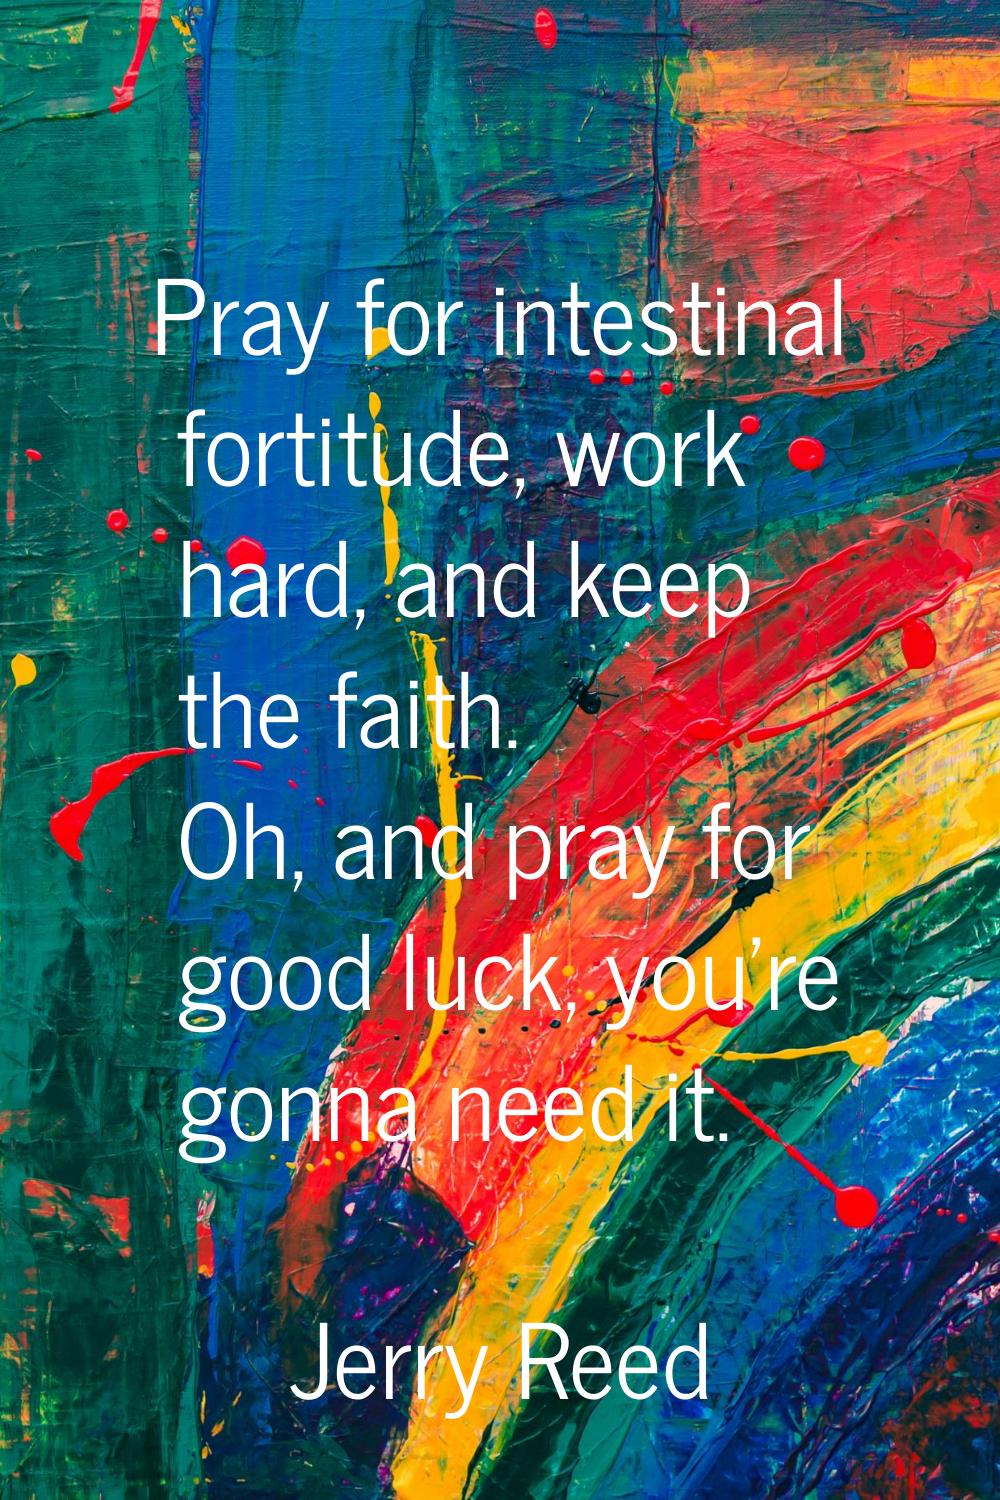 Pray for intestinal fortitude, work hard, and keep the faith. Oh, and pray for good luck, you're go